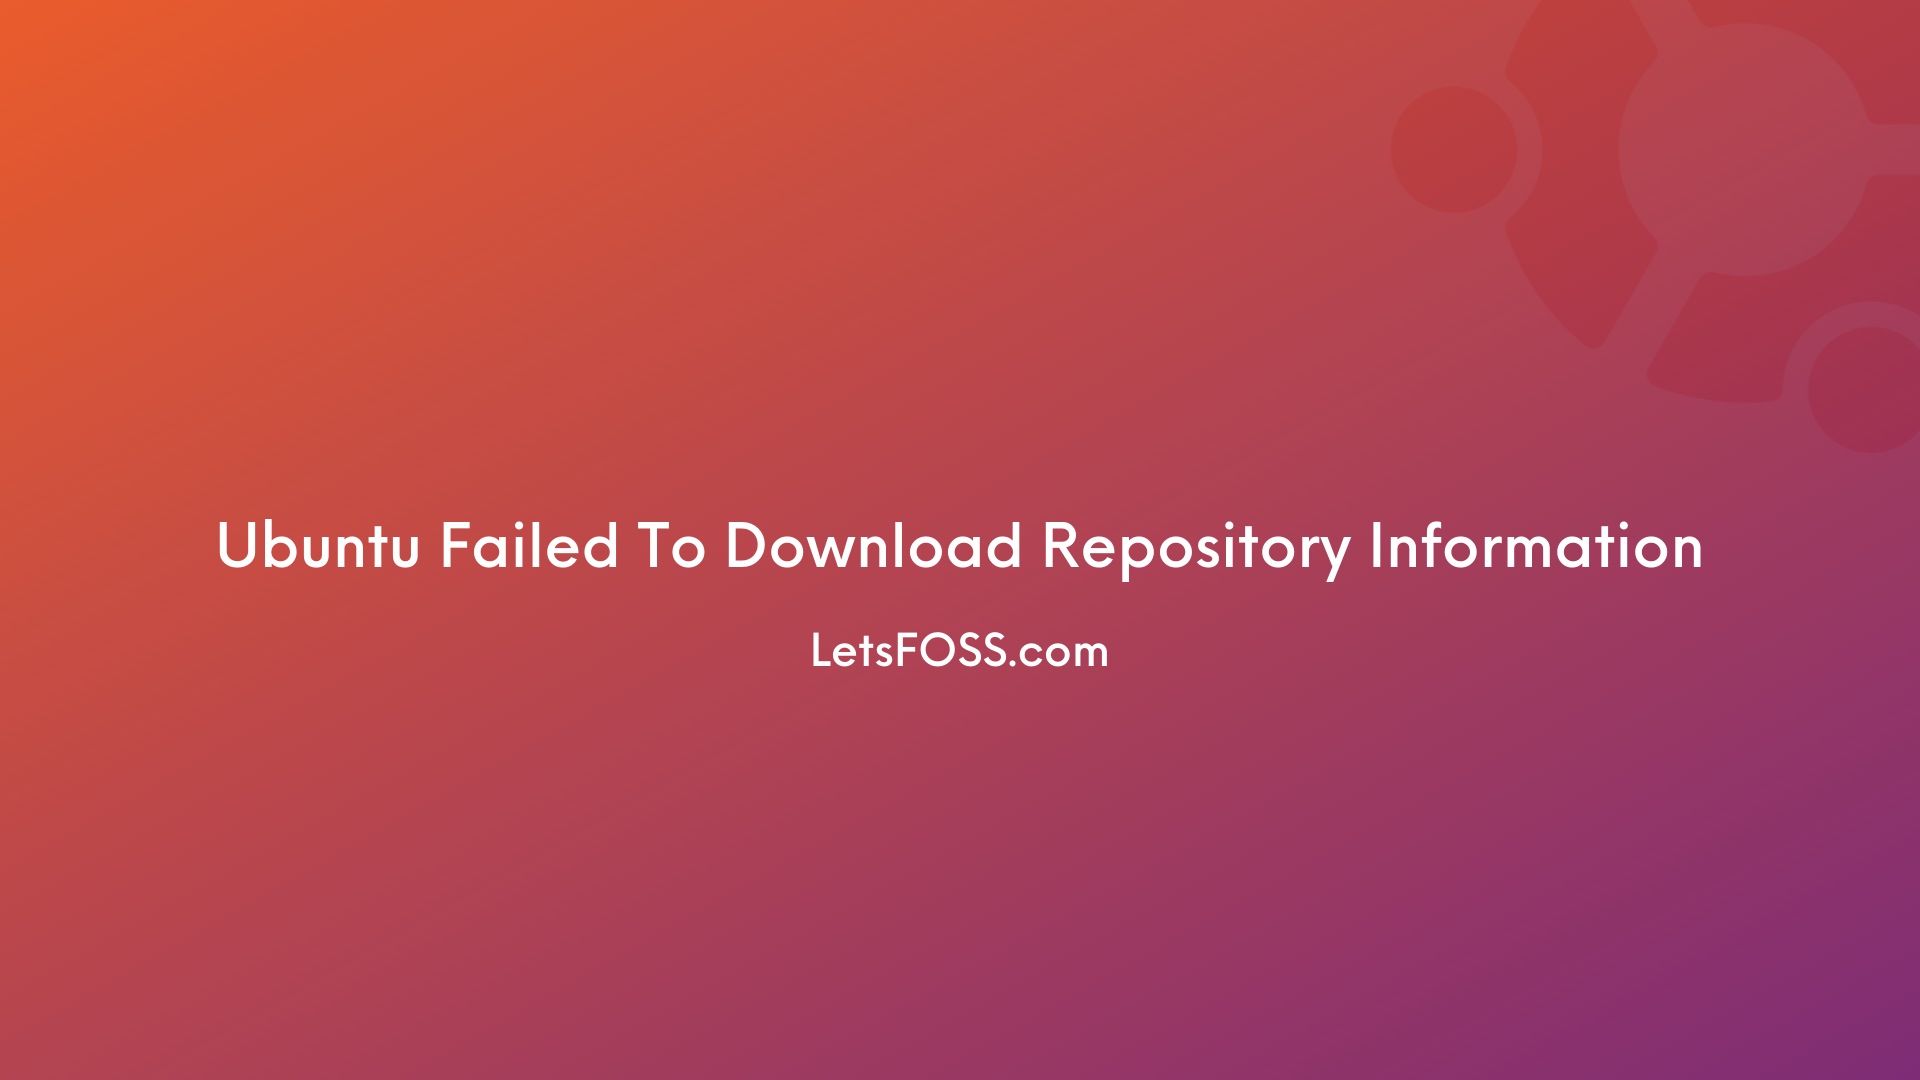 Ubuntu Failed To Download Repository Information